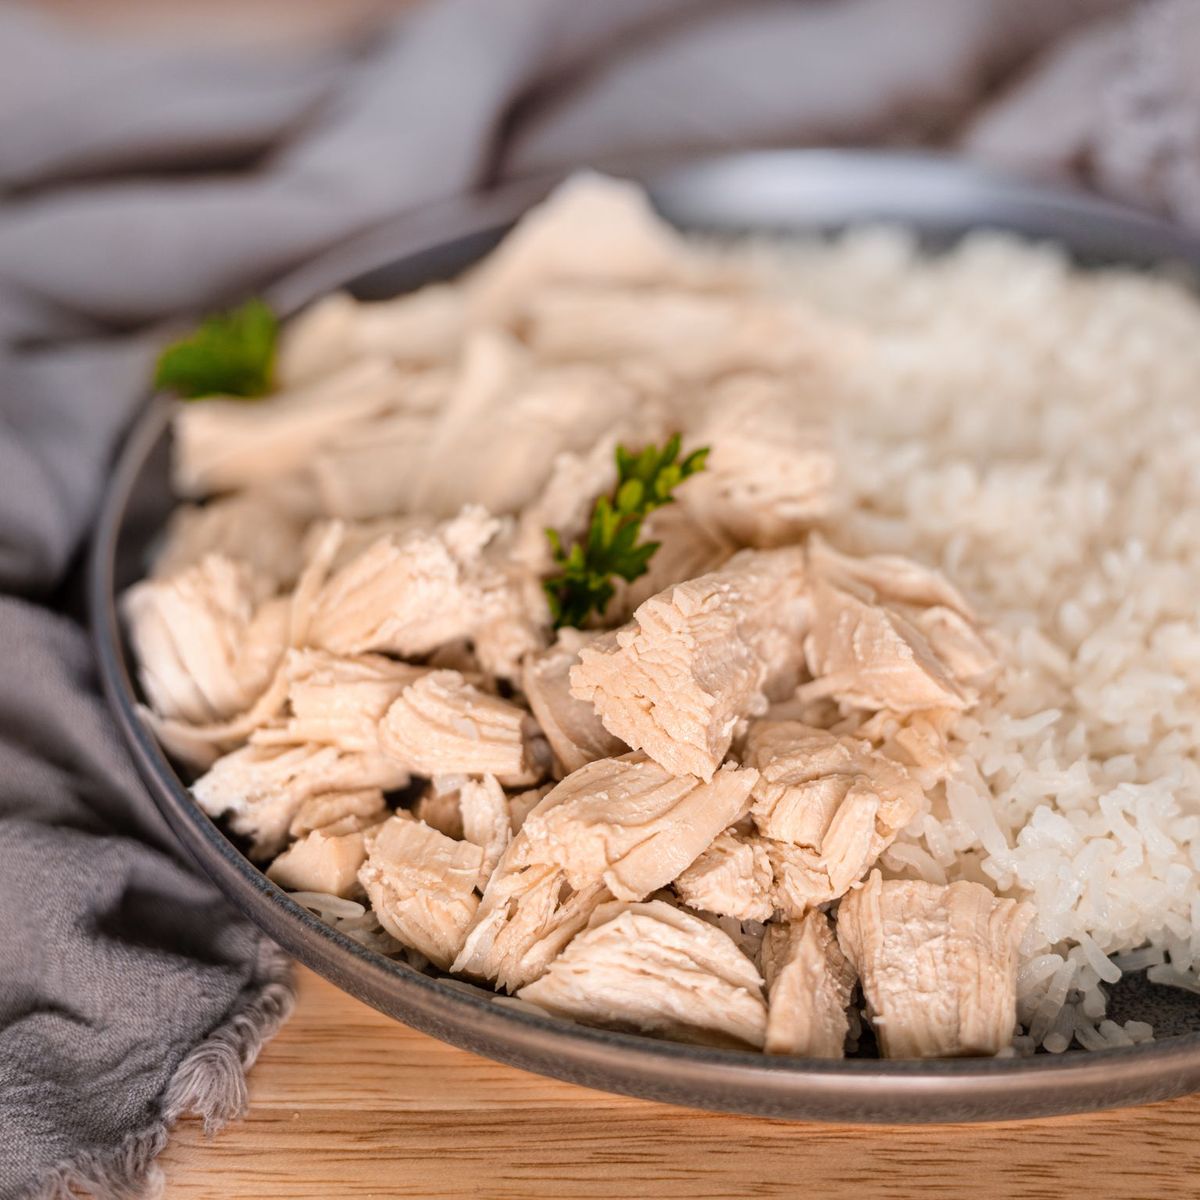 A plate of rice and chicken, part of an emergency food storage, on a wooden table.